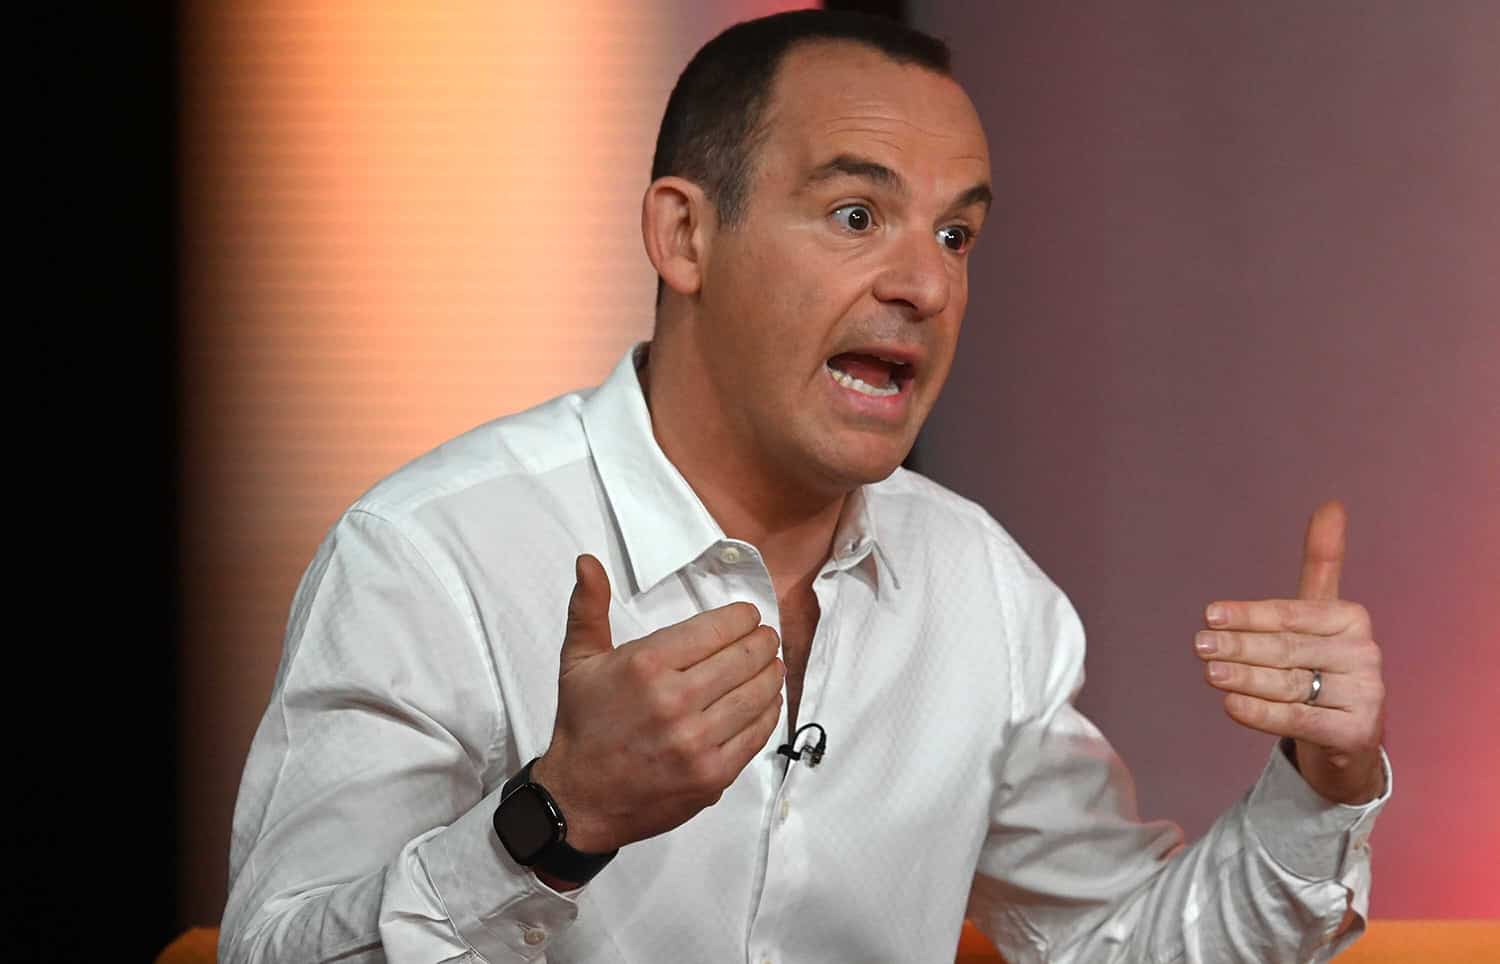 ‘As bad as the pandemic’: Martin Lewis sounds energy bills alarm